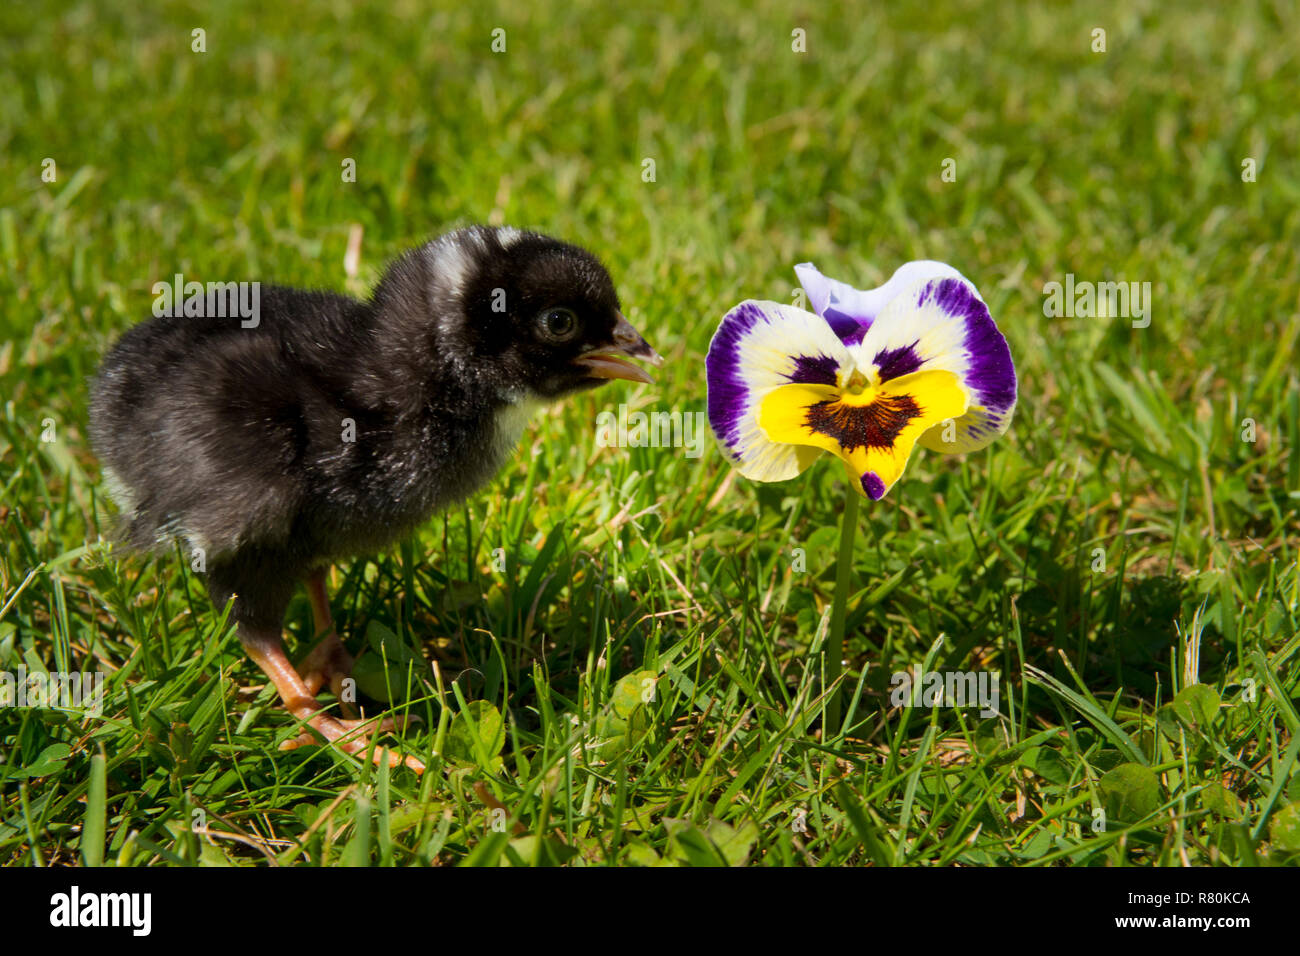 Domestic chicken, Amrock Bantam chicken. Chick standing in grass next to Pansy flower. Germany Stock Photo